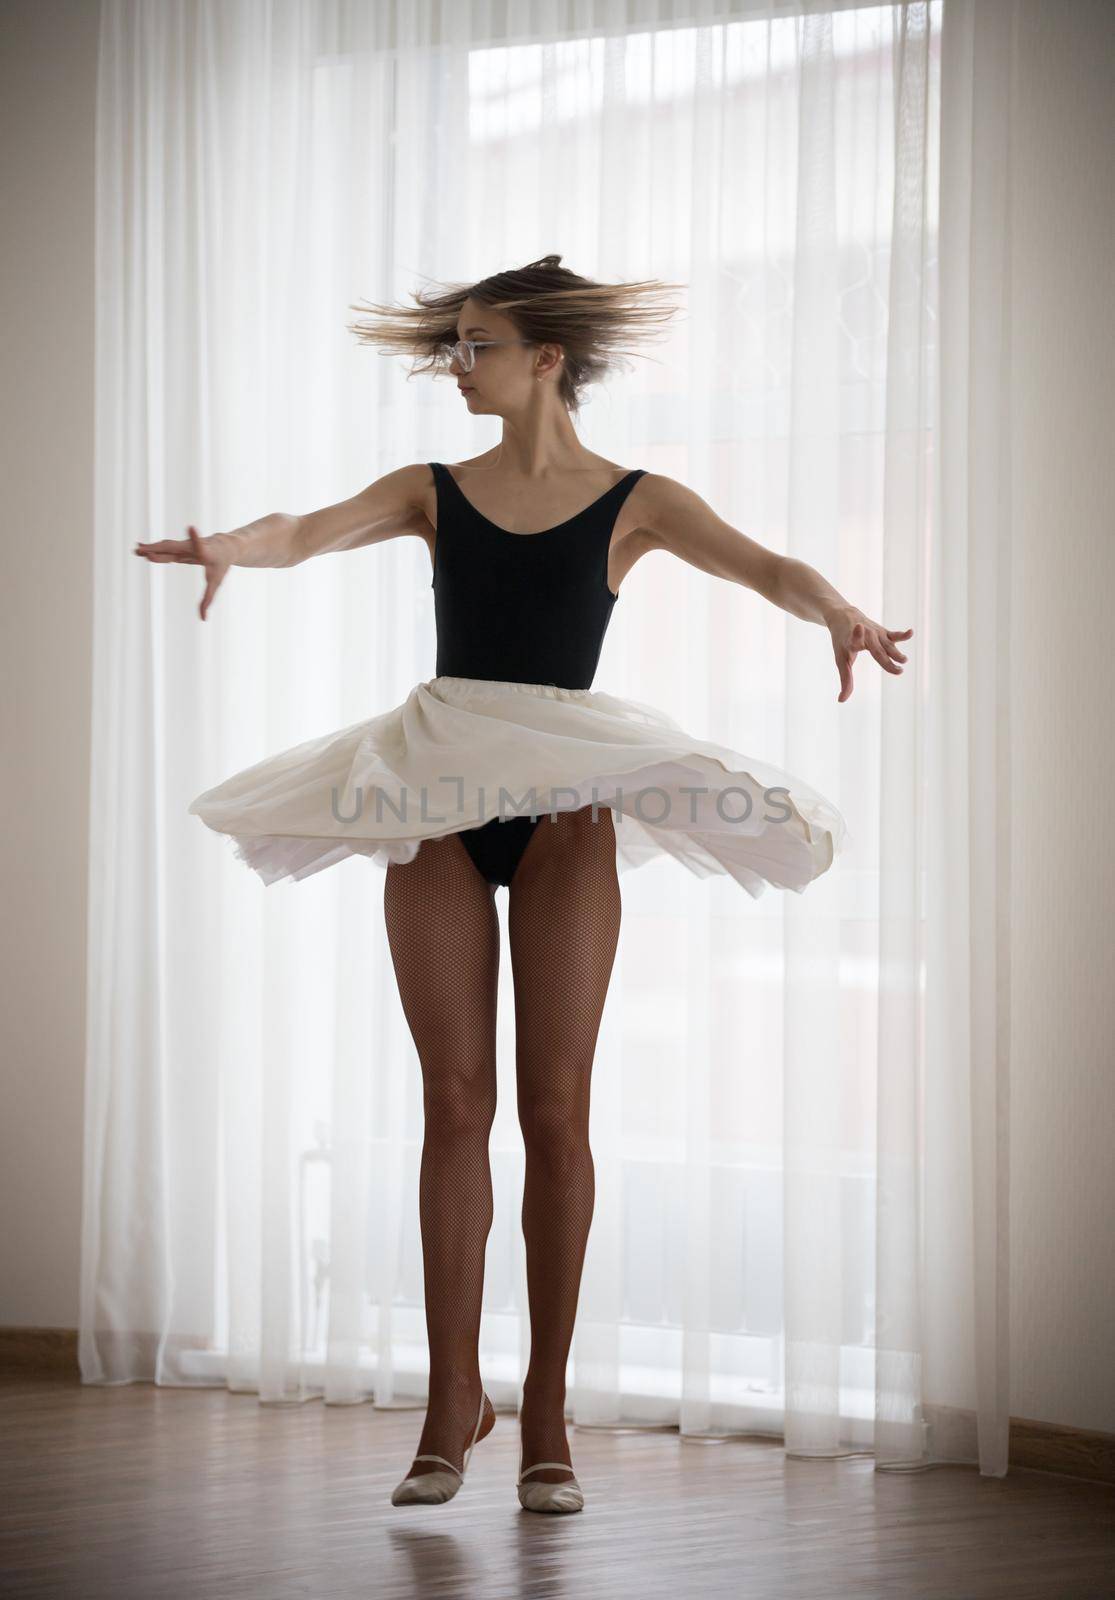 Girl ballerina makes a jump in the studio by Studia72